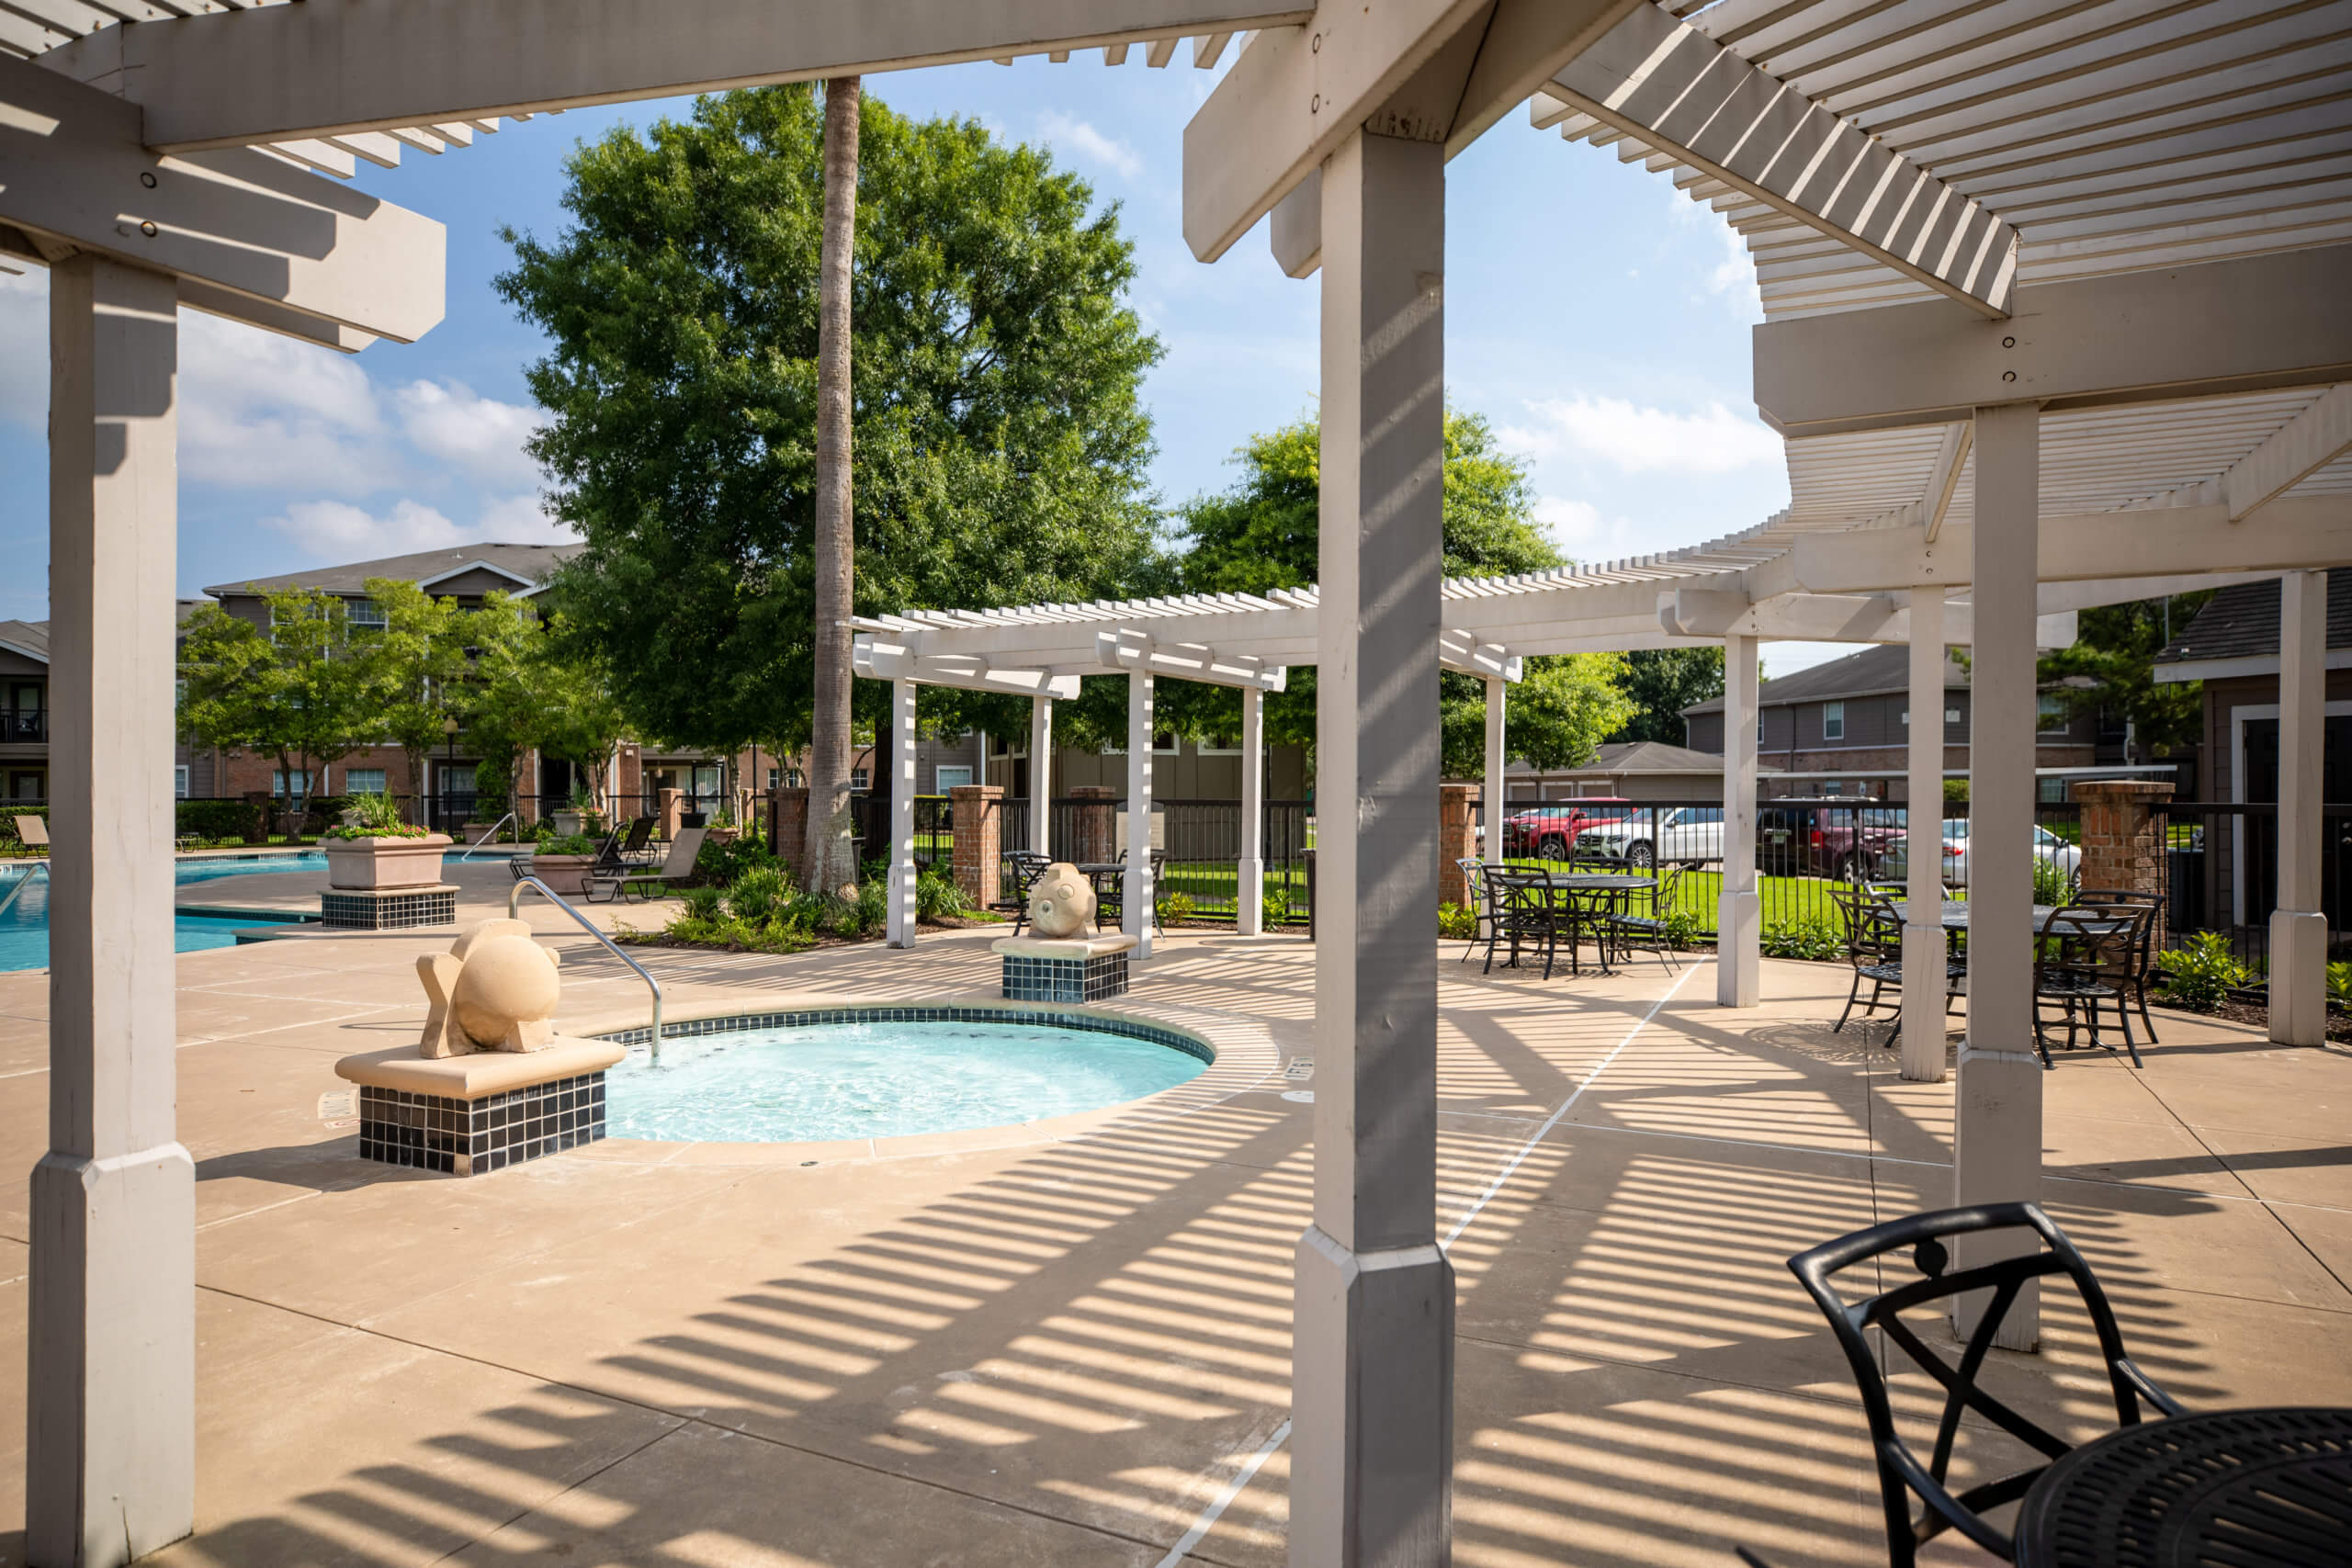 Image of swimming pool and patio space at Memorial Heights.